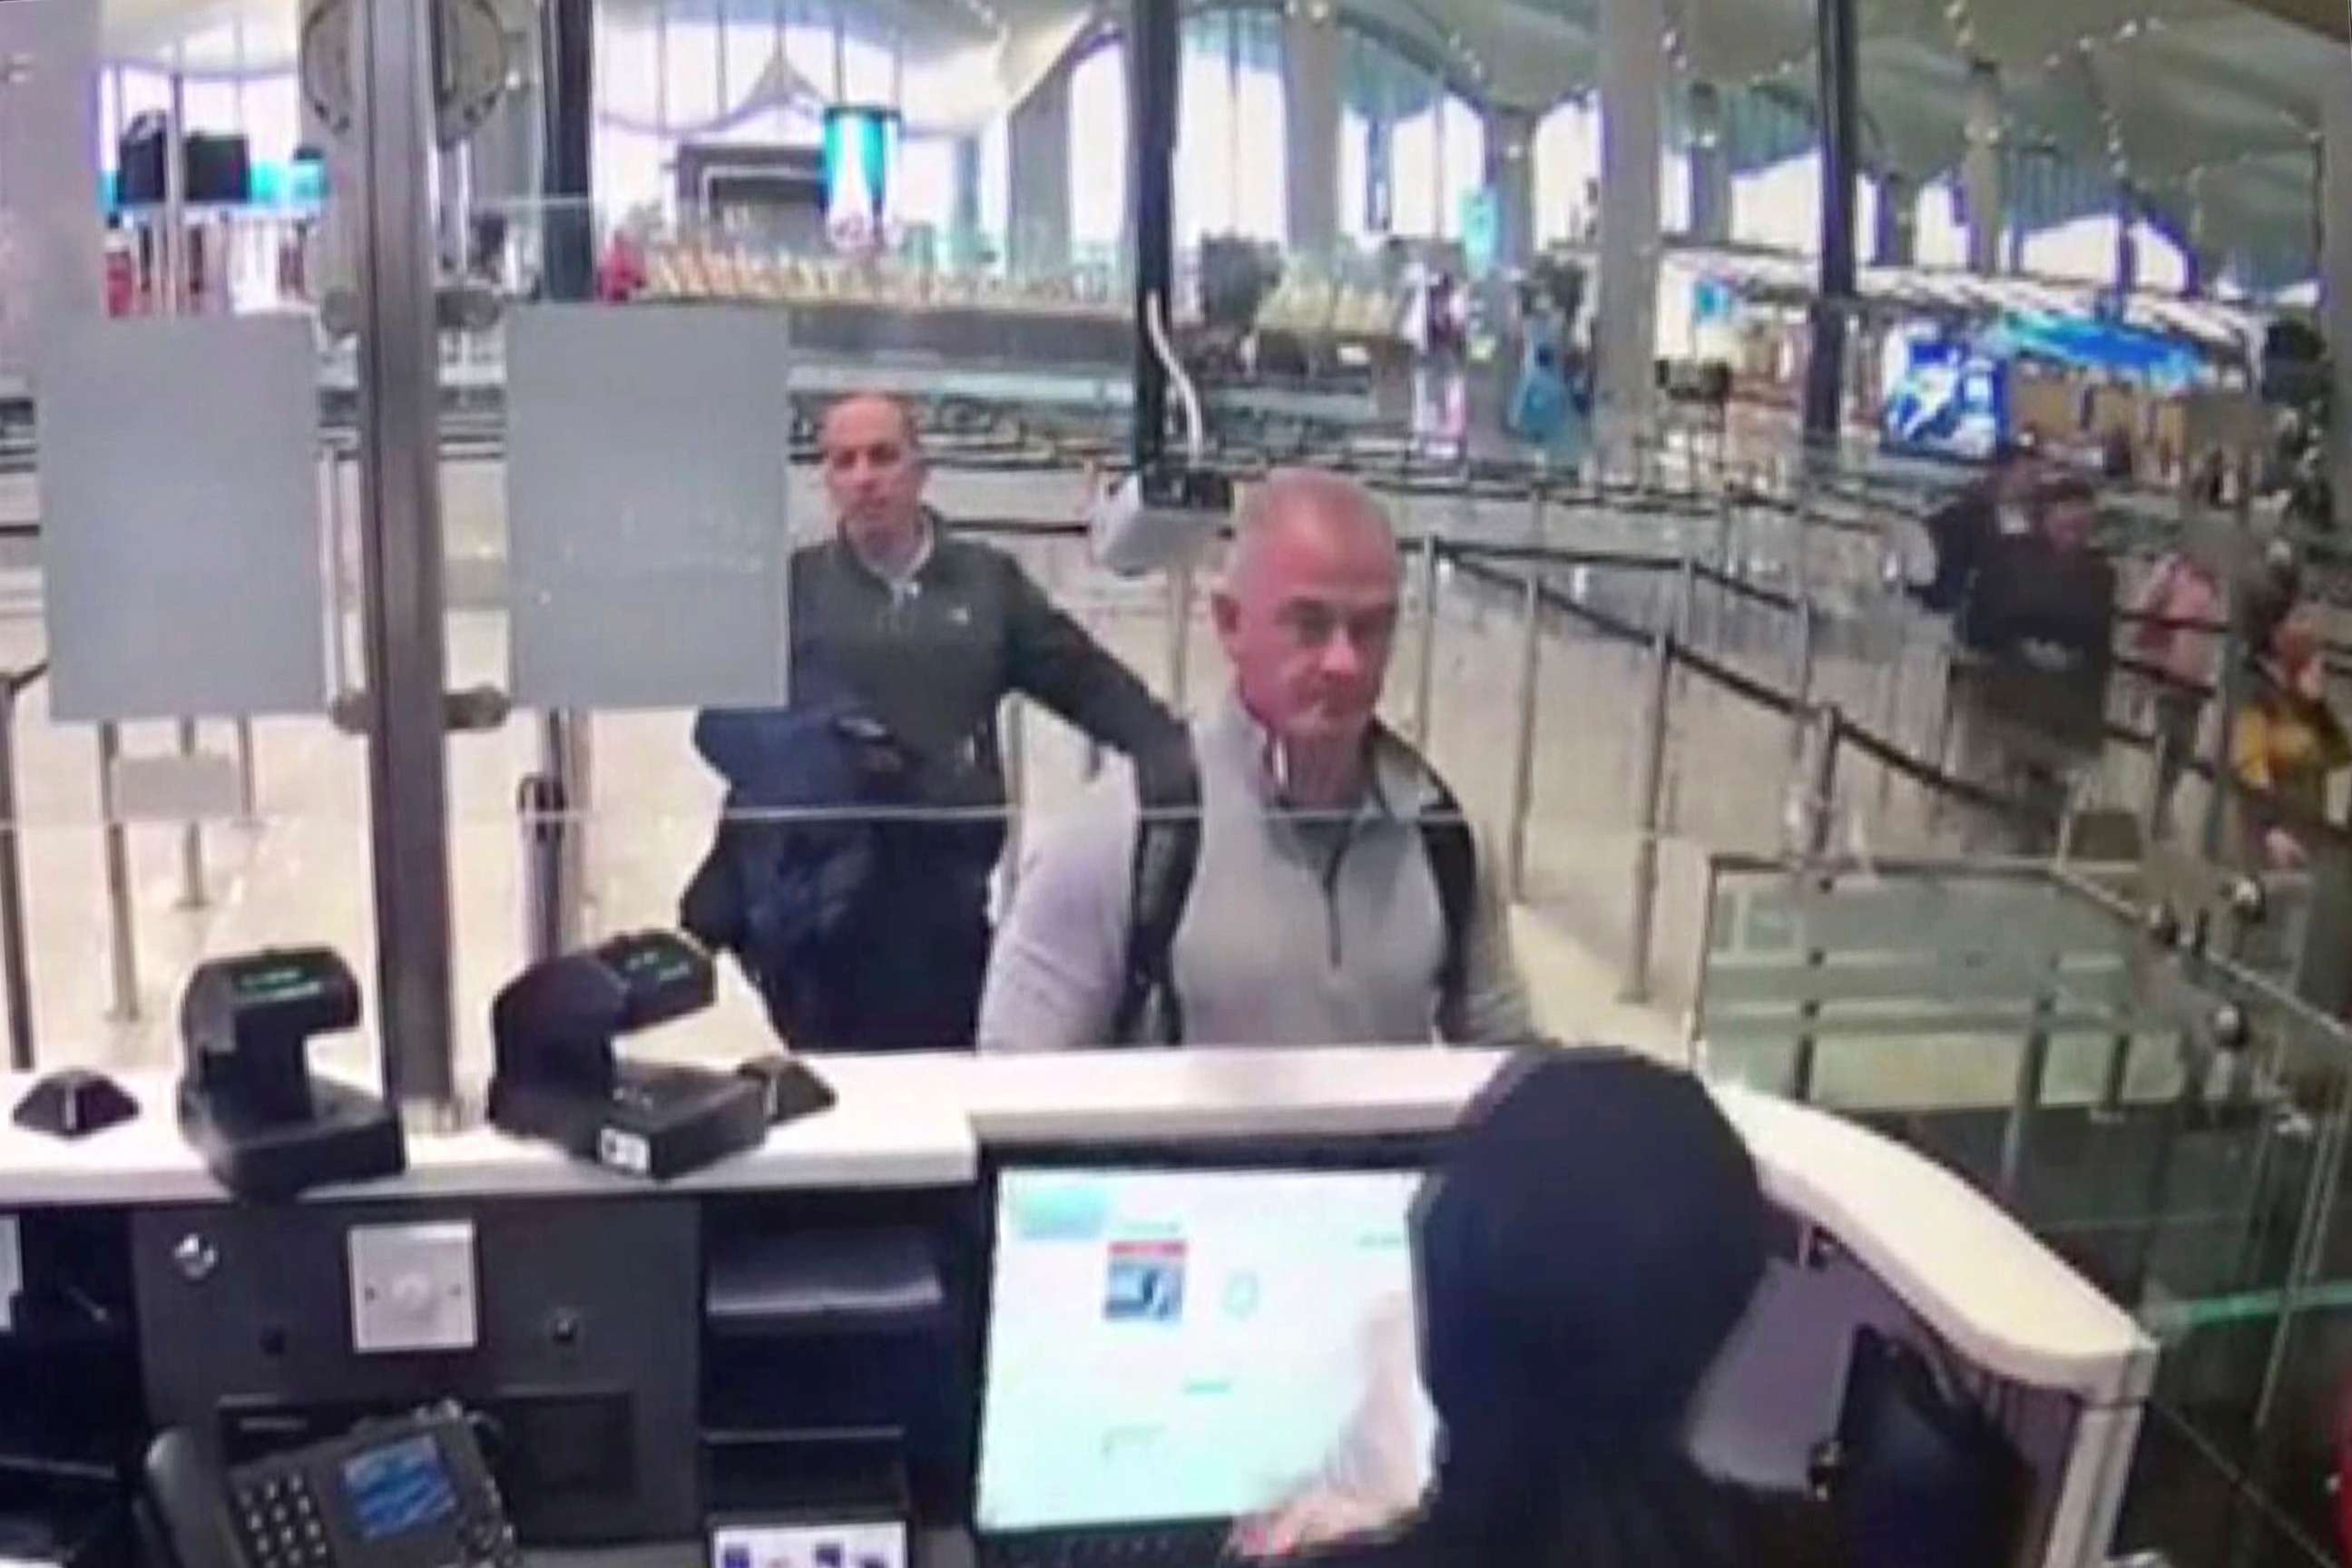 PHOTO:This Dec. 30, 2019 image from security camera video shows Michael L. Taylor, center, and George-Antoine Zayek at passport control at Istanbul Airport in Turkey. 